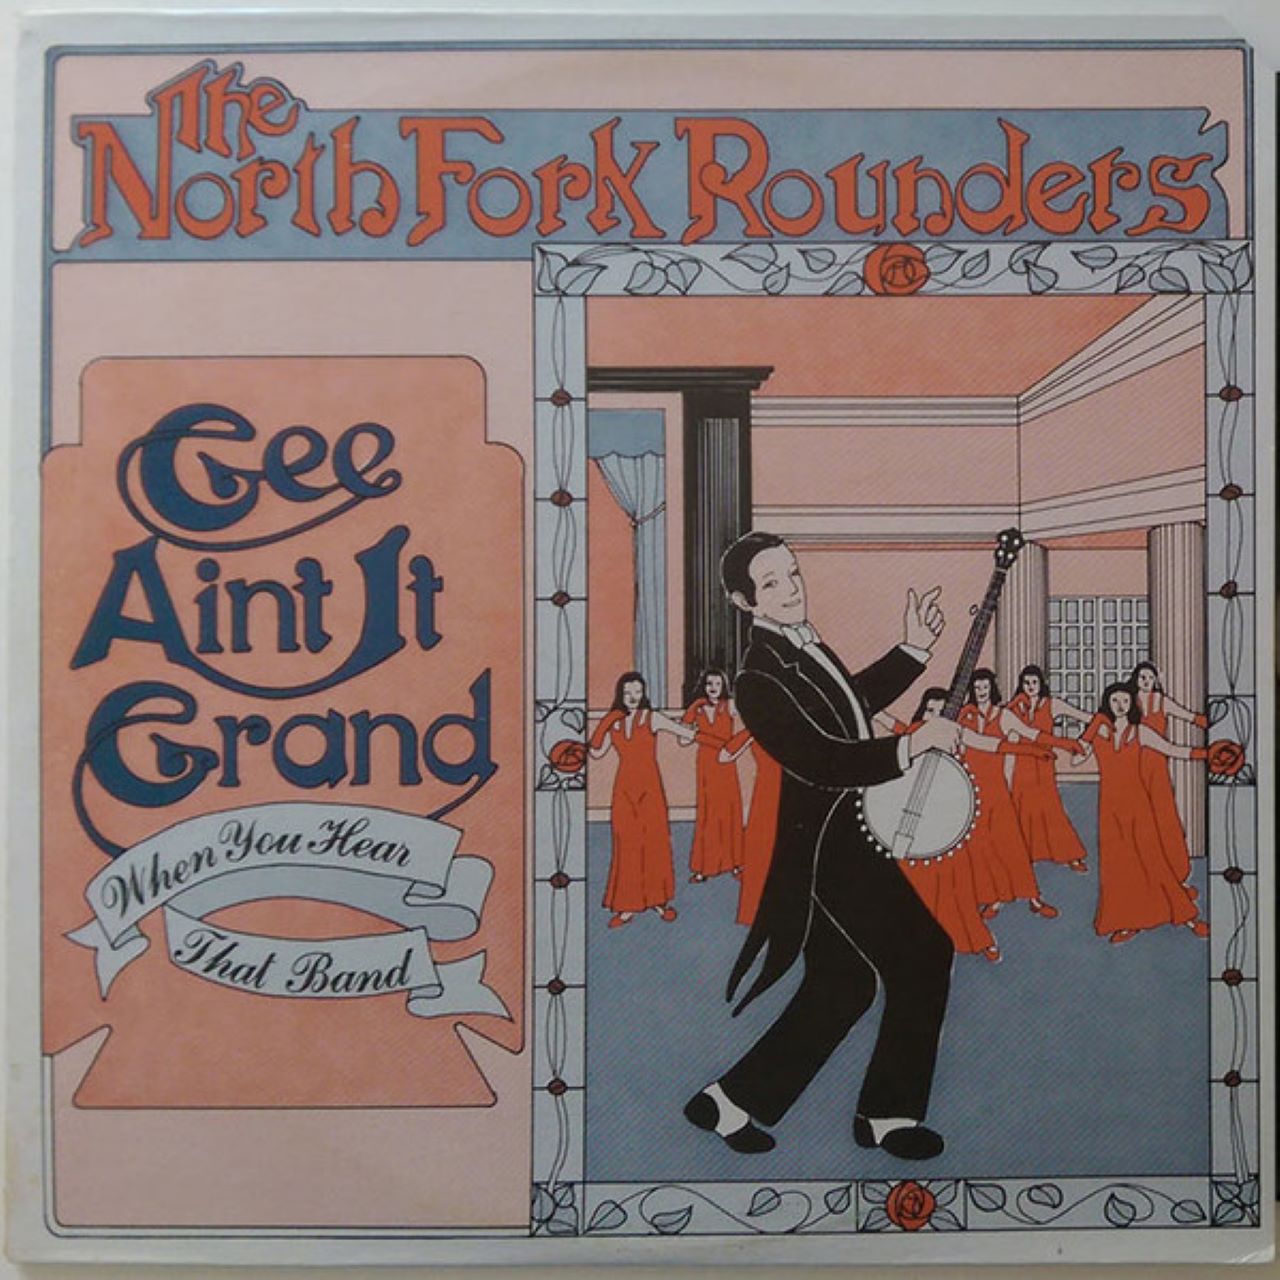 North Fork Rounders - Gee Ain't It Grand cover album